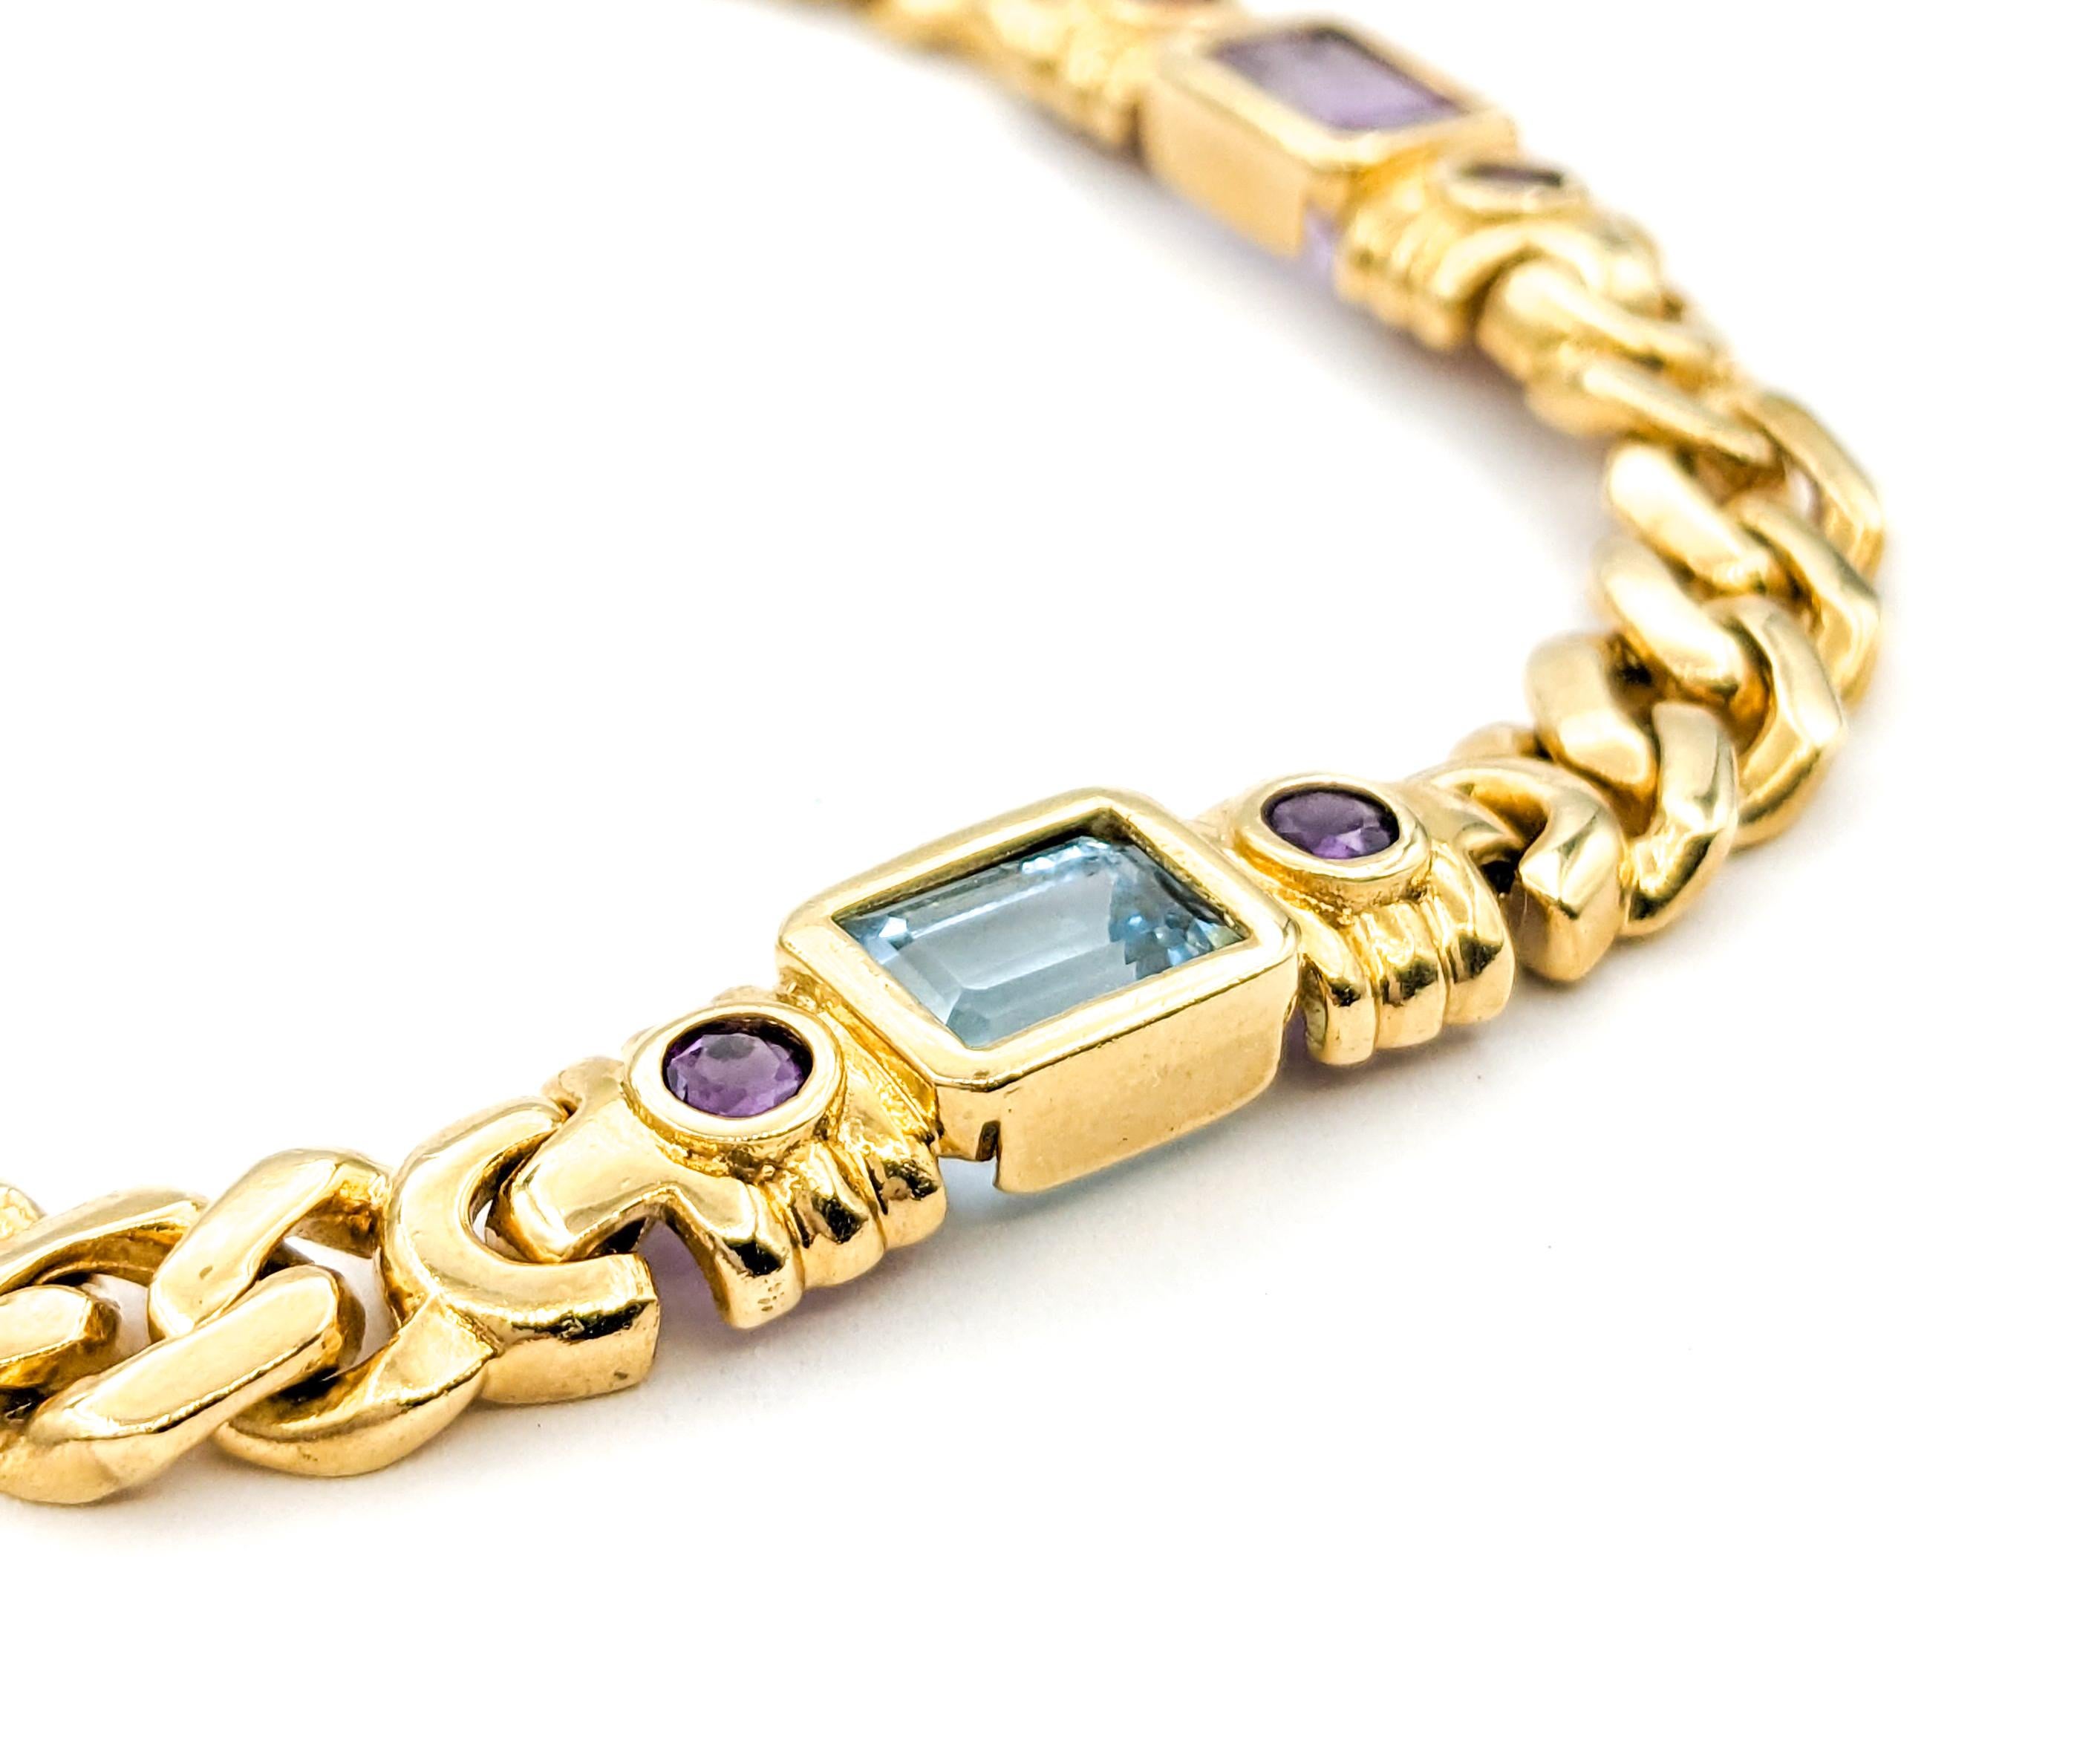 Multicolored Gemstone & 14K Gold Link Bracelet In Excellent Condition For Sale In Bloomington, MN